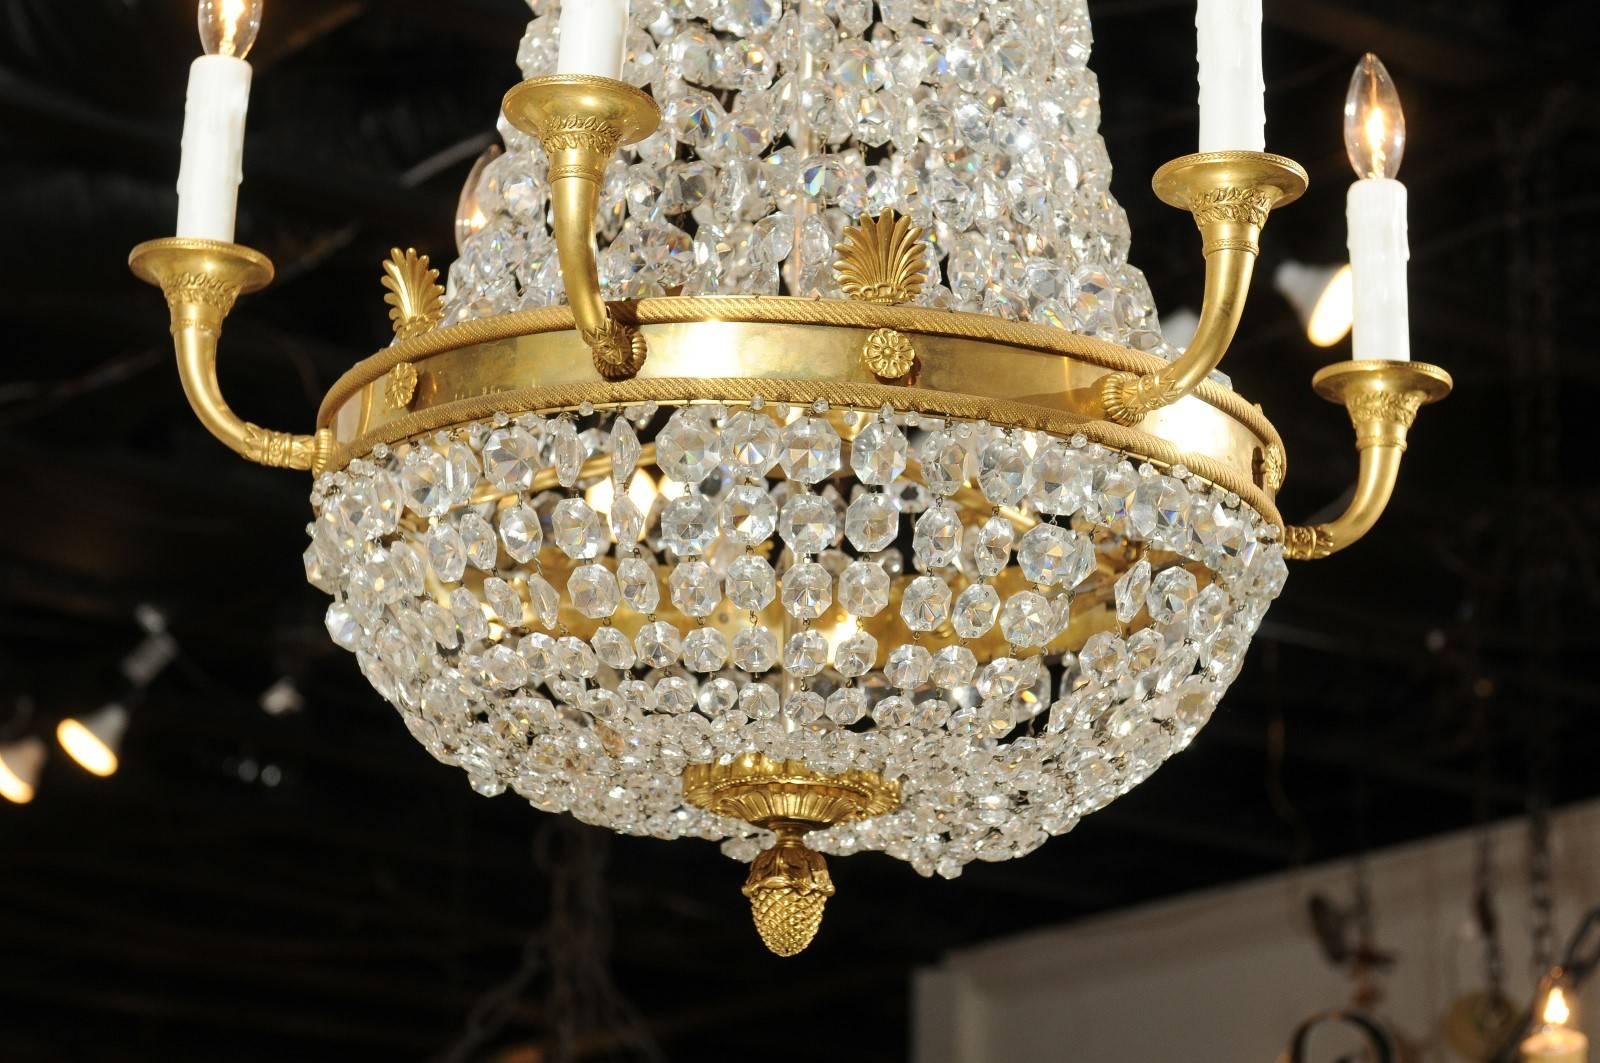 19th Century French Empire Style Crystal and Gilt Metal Waterfall Basket Six-Arm Chandelier